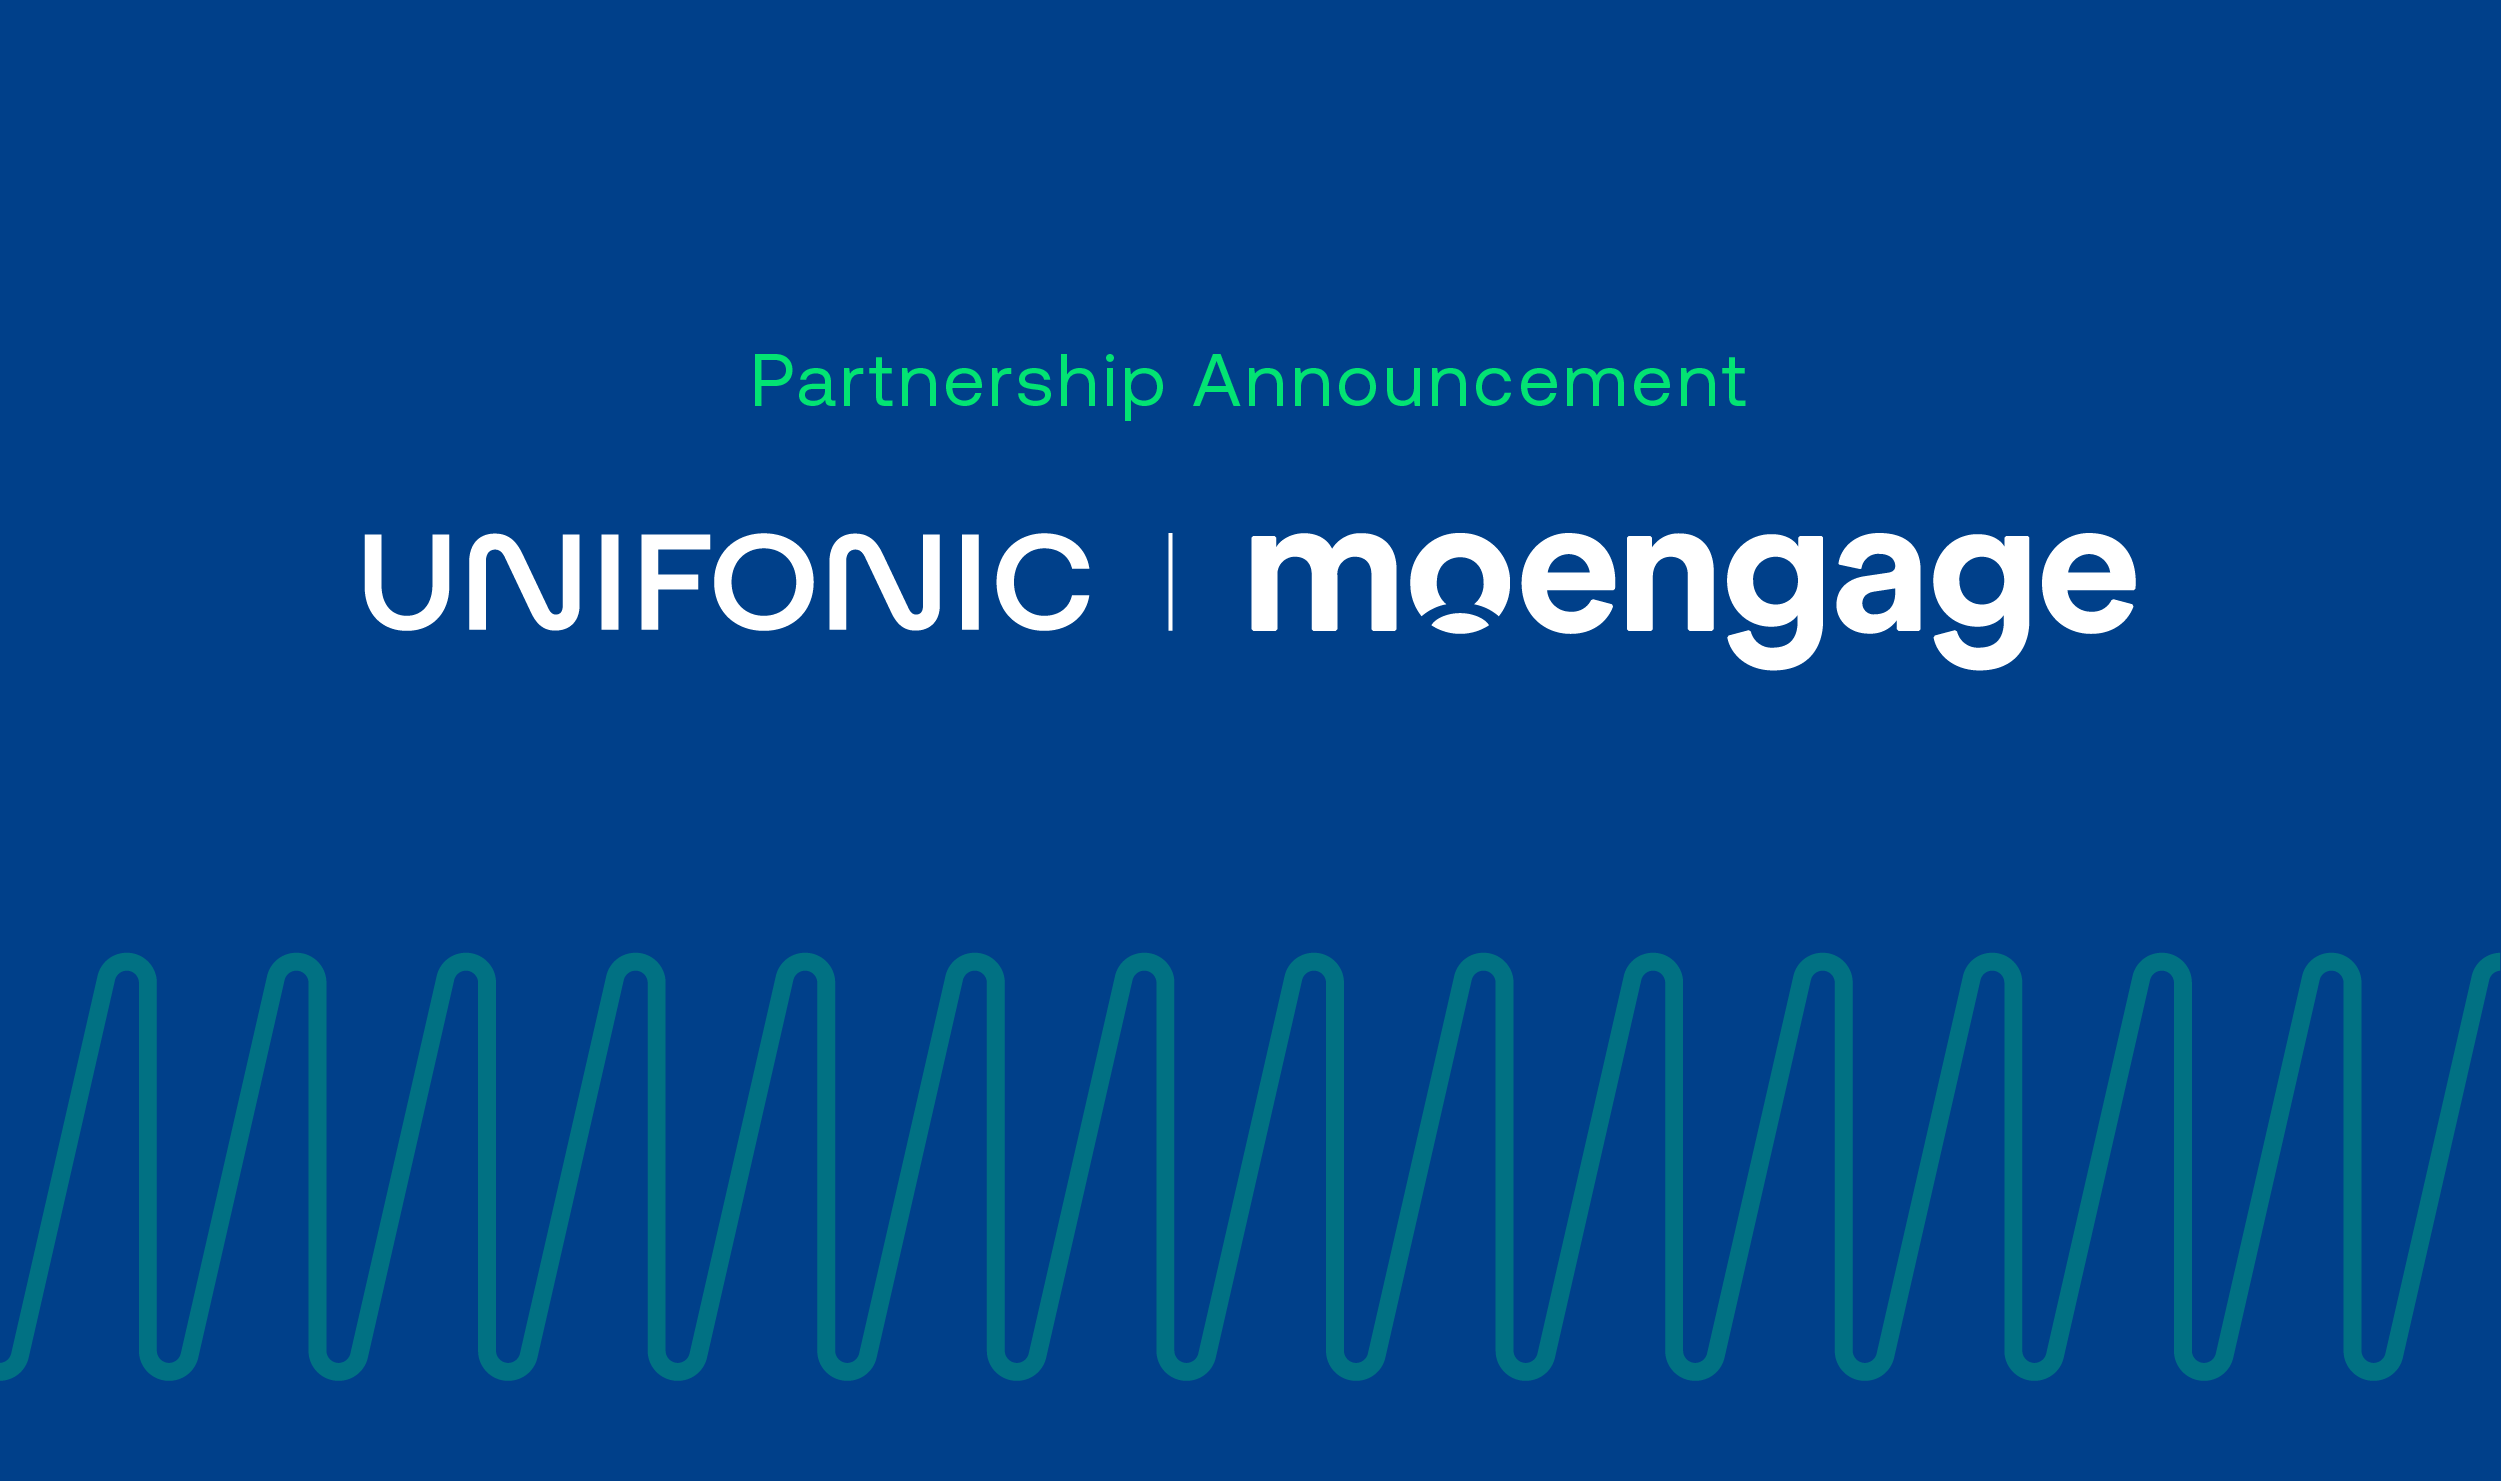 Unifonic partners with MoEngage to deliver superior customer engagement solutions to customers in the Middle East.